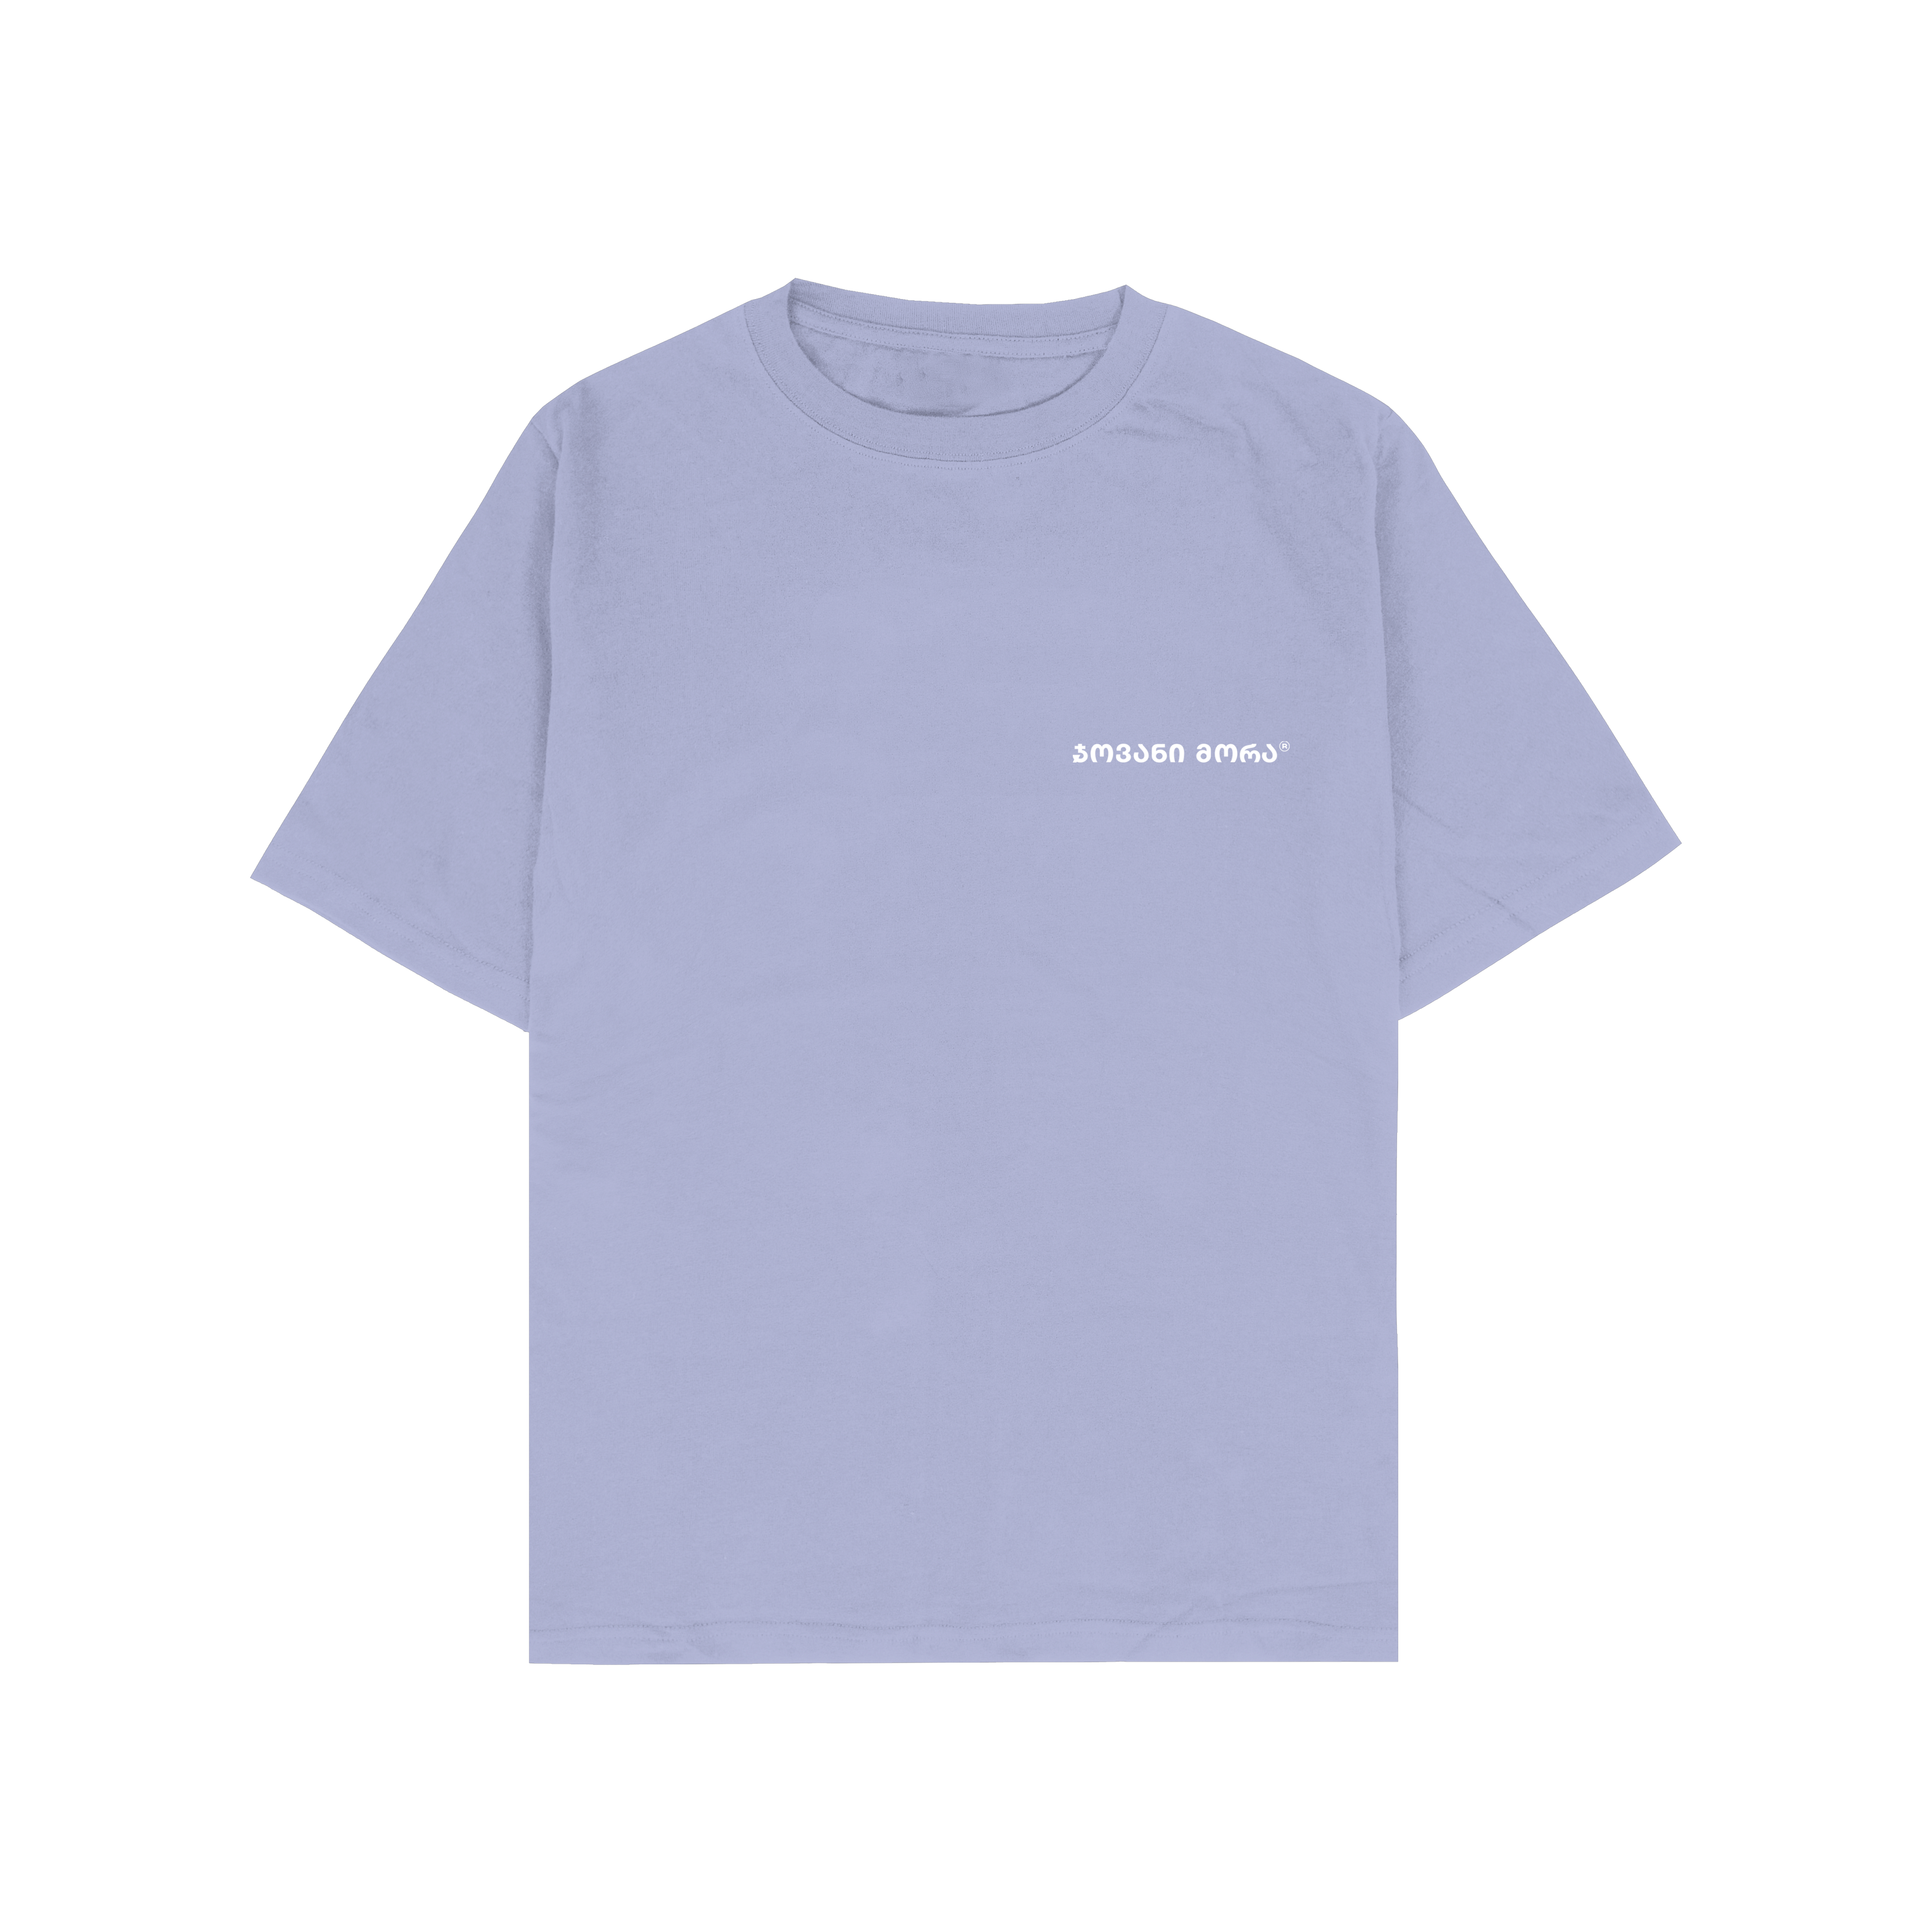 T-shirt (Lavender), Relaxed Fit